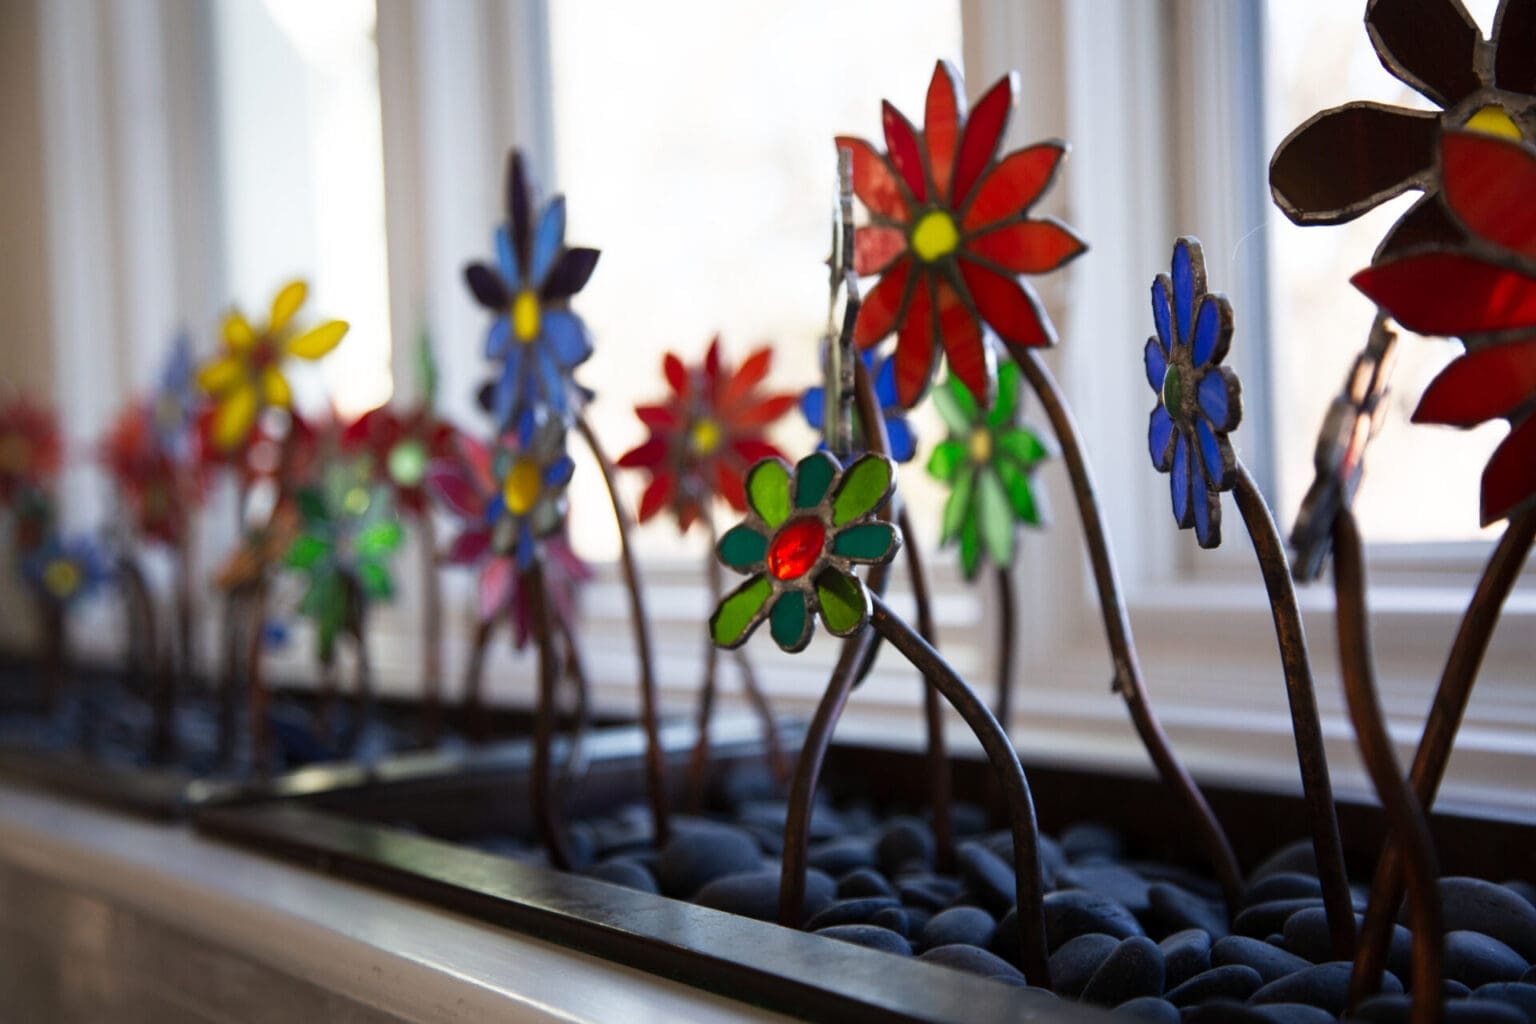 A photo of decorative multicolored stained glass flowers in front of kitchen windows.